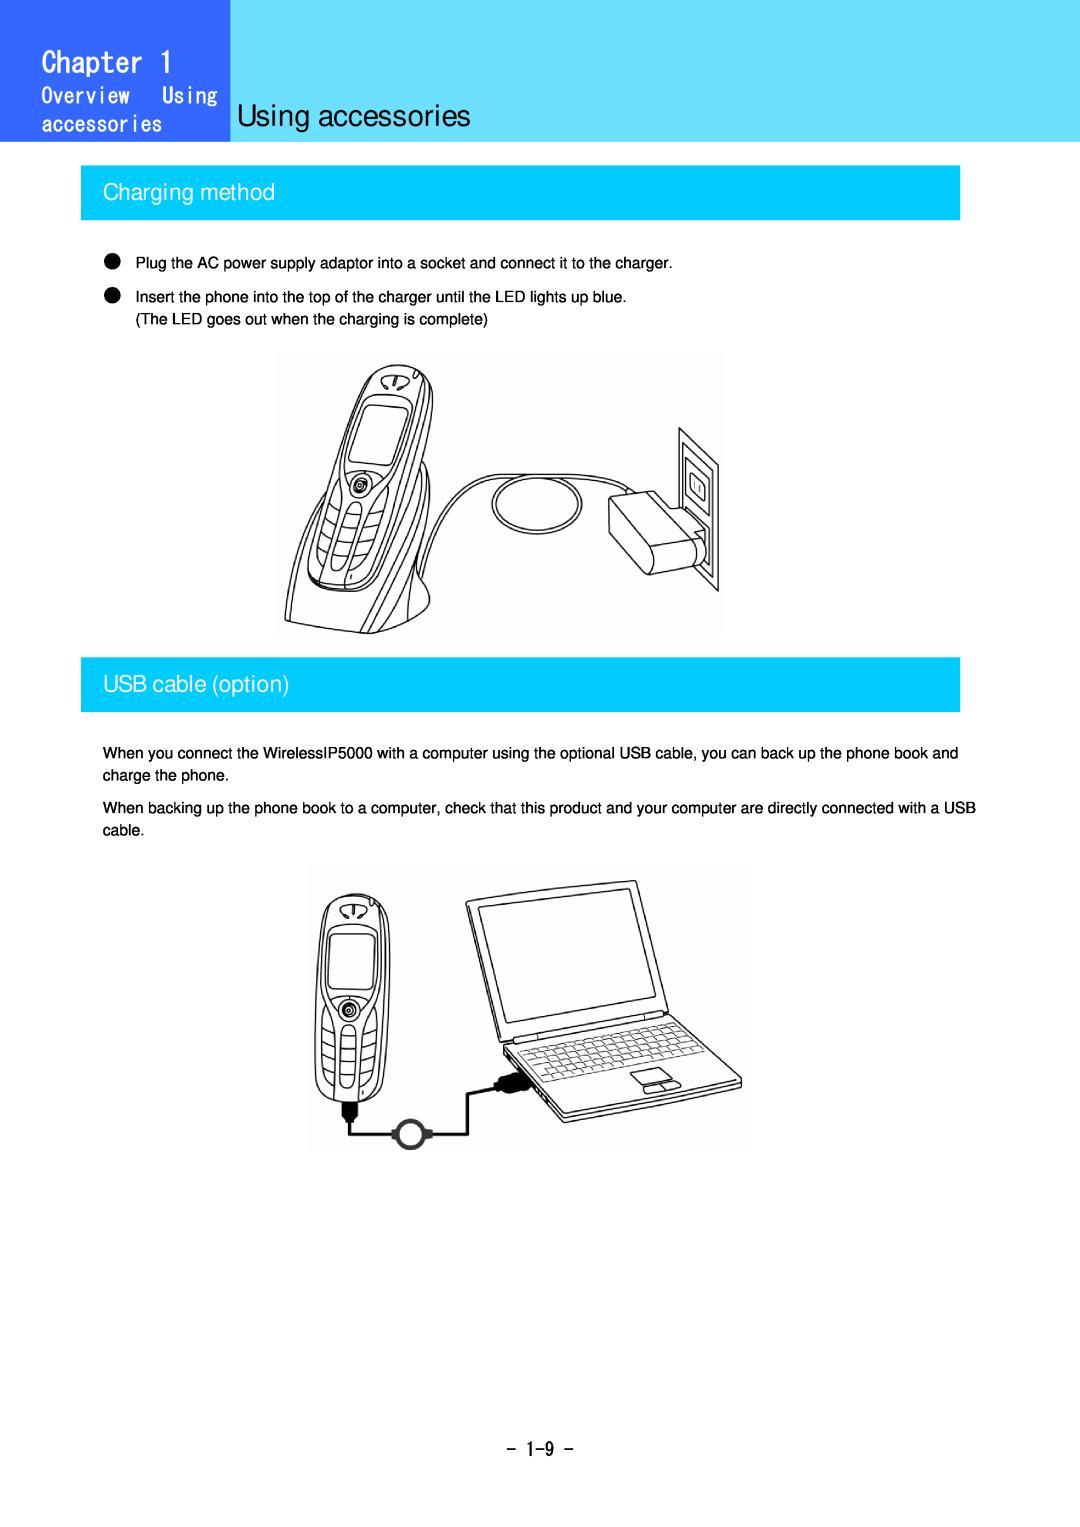 Hitachi 5000 user manual Charging method, USB cable option, Using accessories, Chapter, Overview 